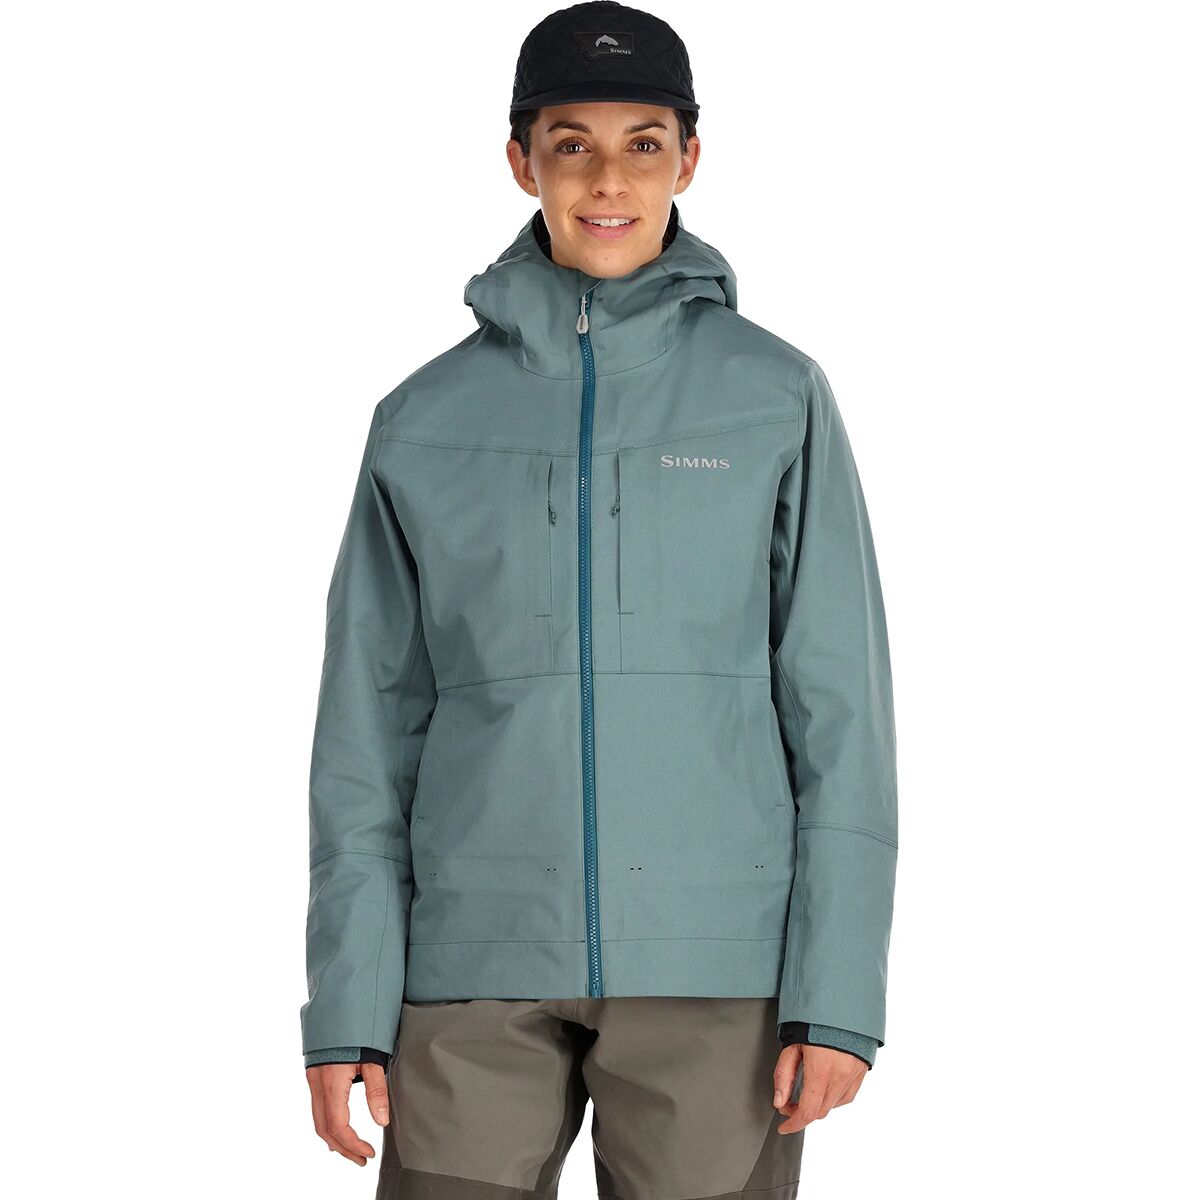 Simms G3 Guide Wading Jacket - Women's - Clothing